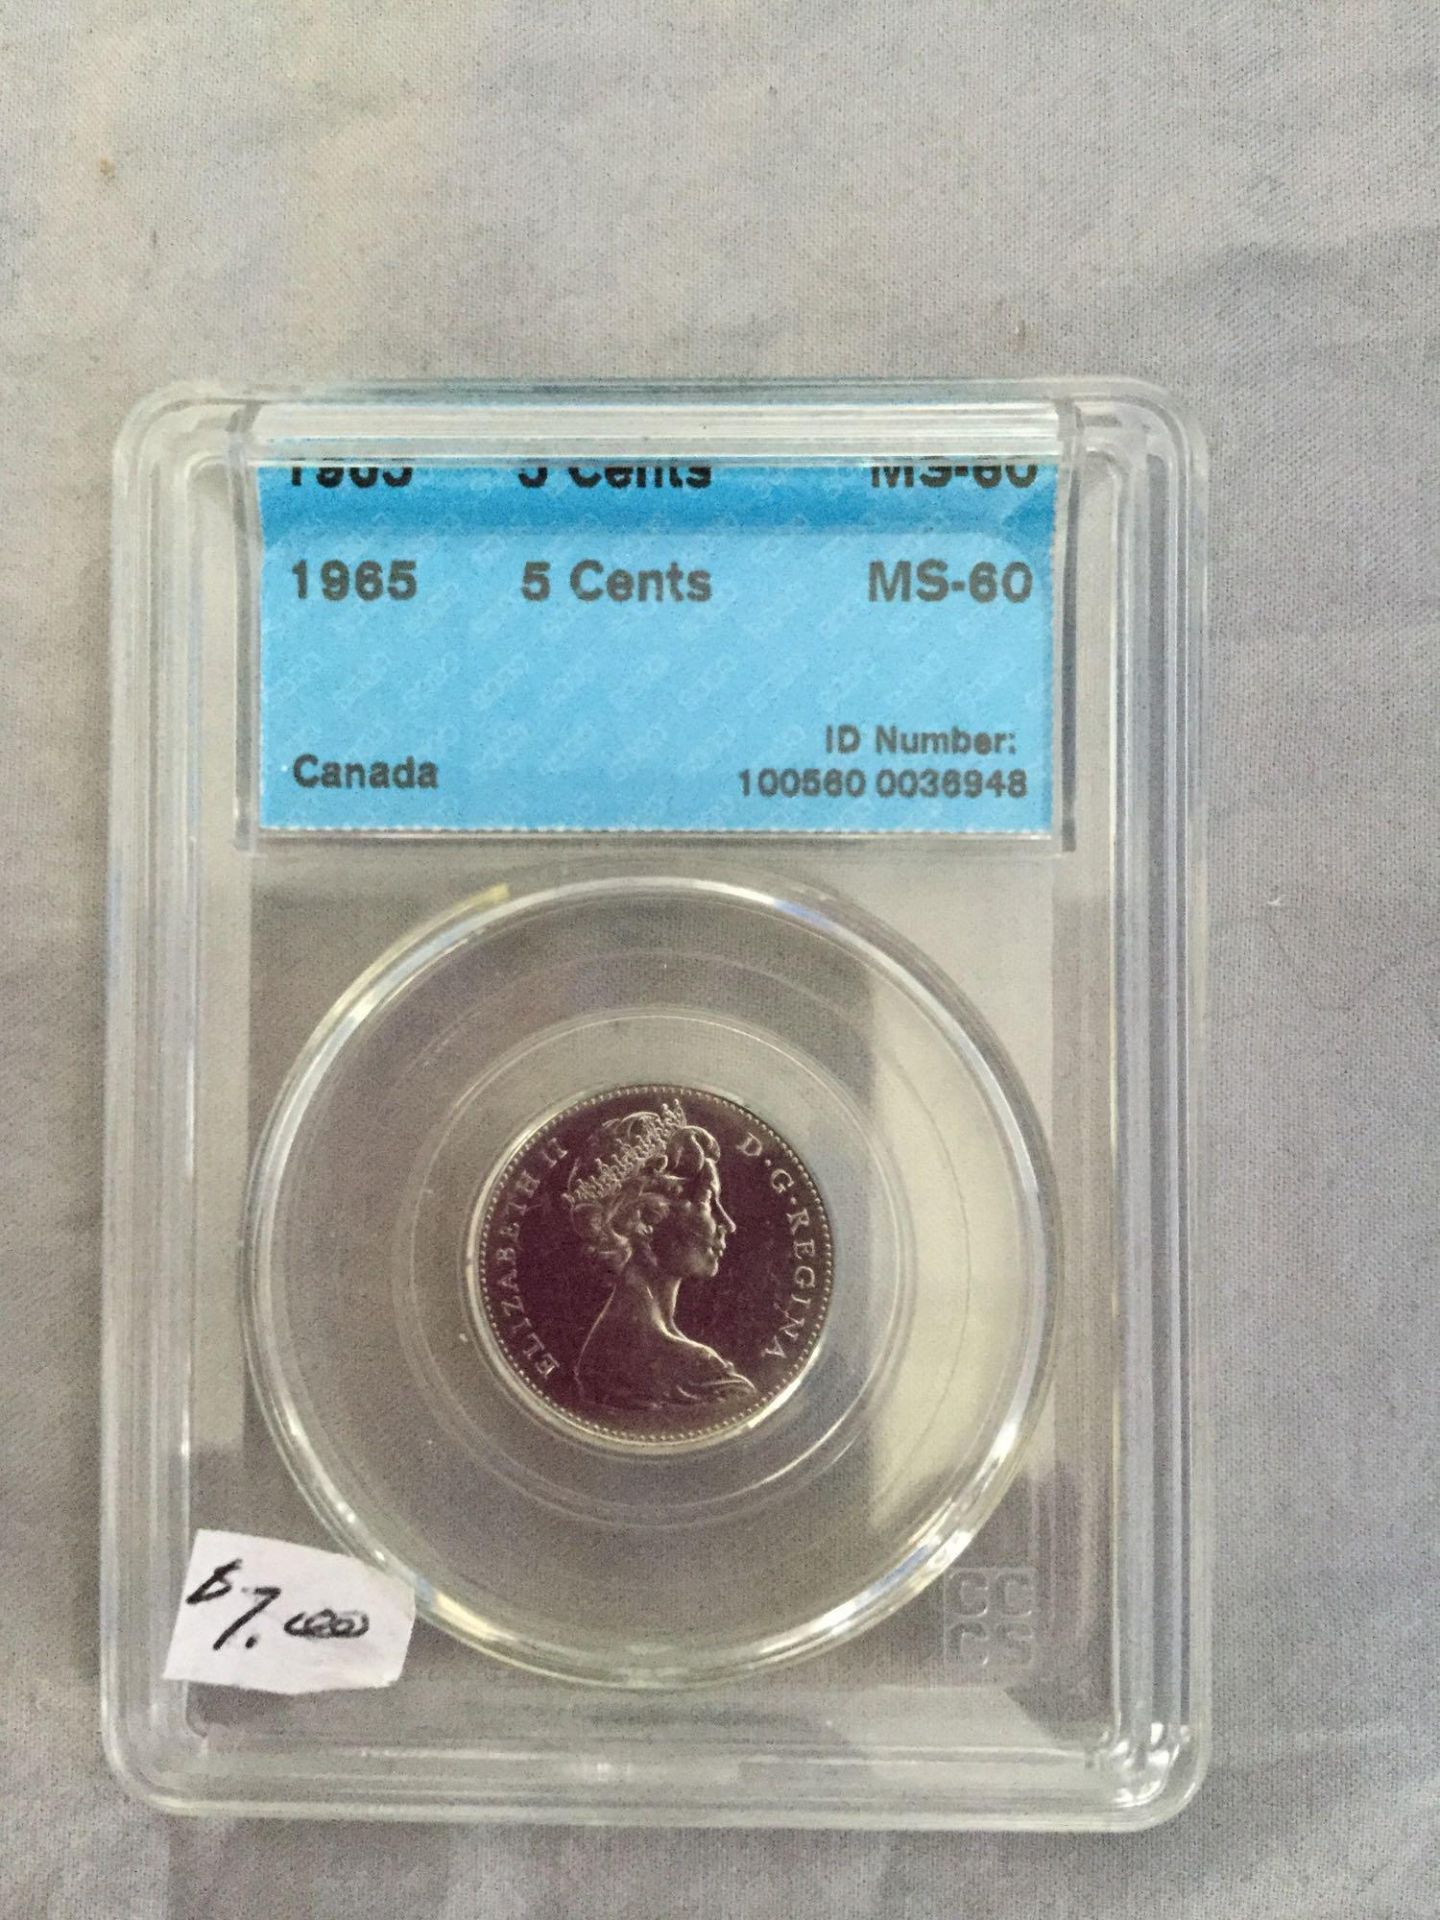 1965 - Royal Canadian Mint 5 Cent Coin - MS-60